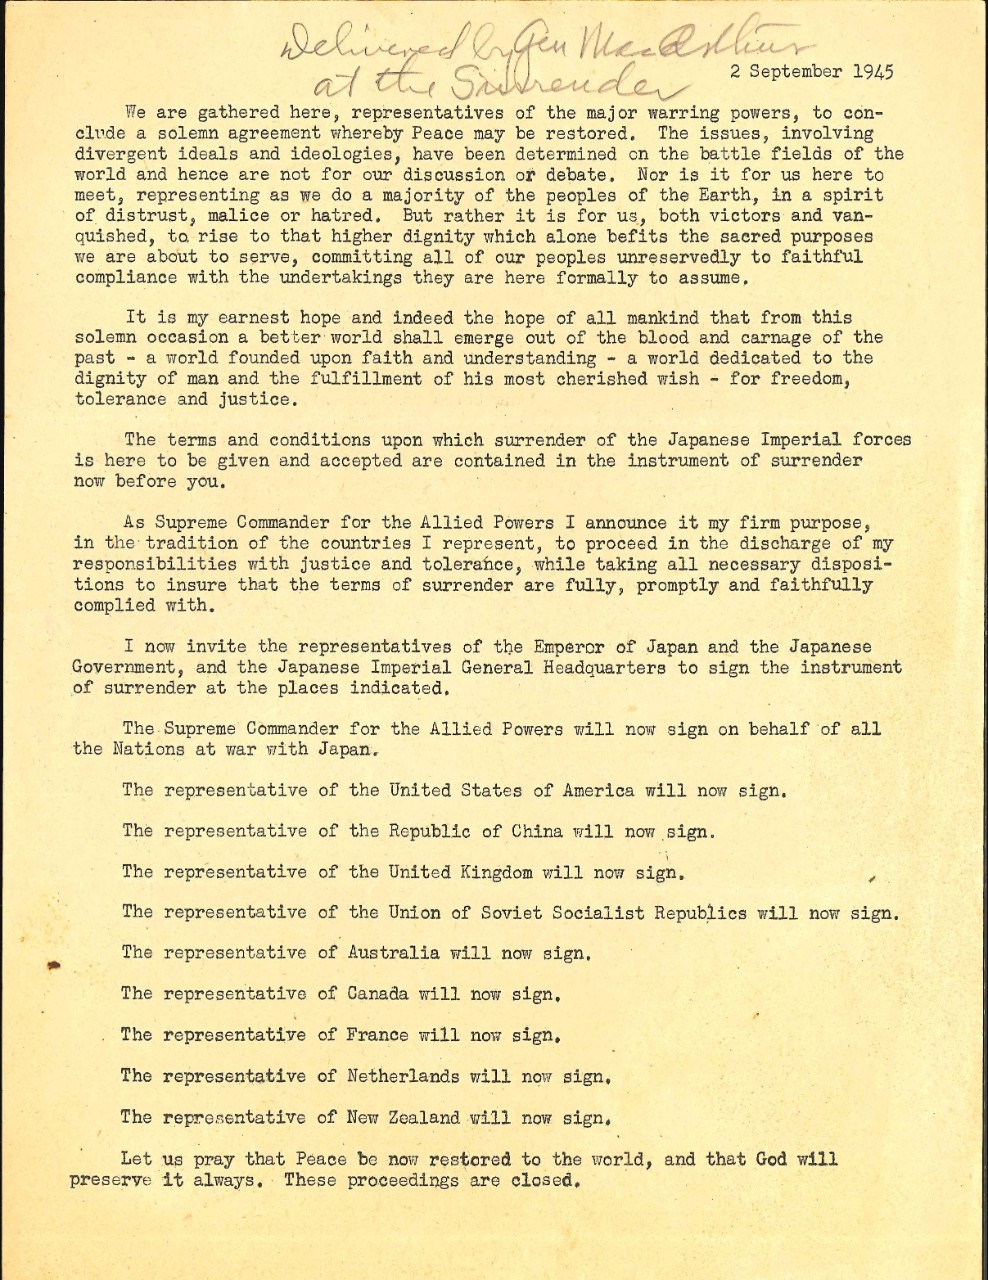 <p>Speech delivered by General MacArthur at the surrender ceremony in Tokyo Bay, Sep. 2, 1945</p>